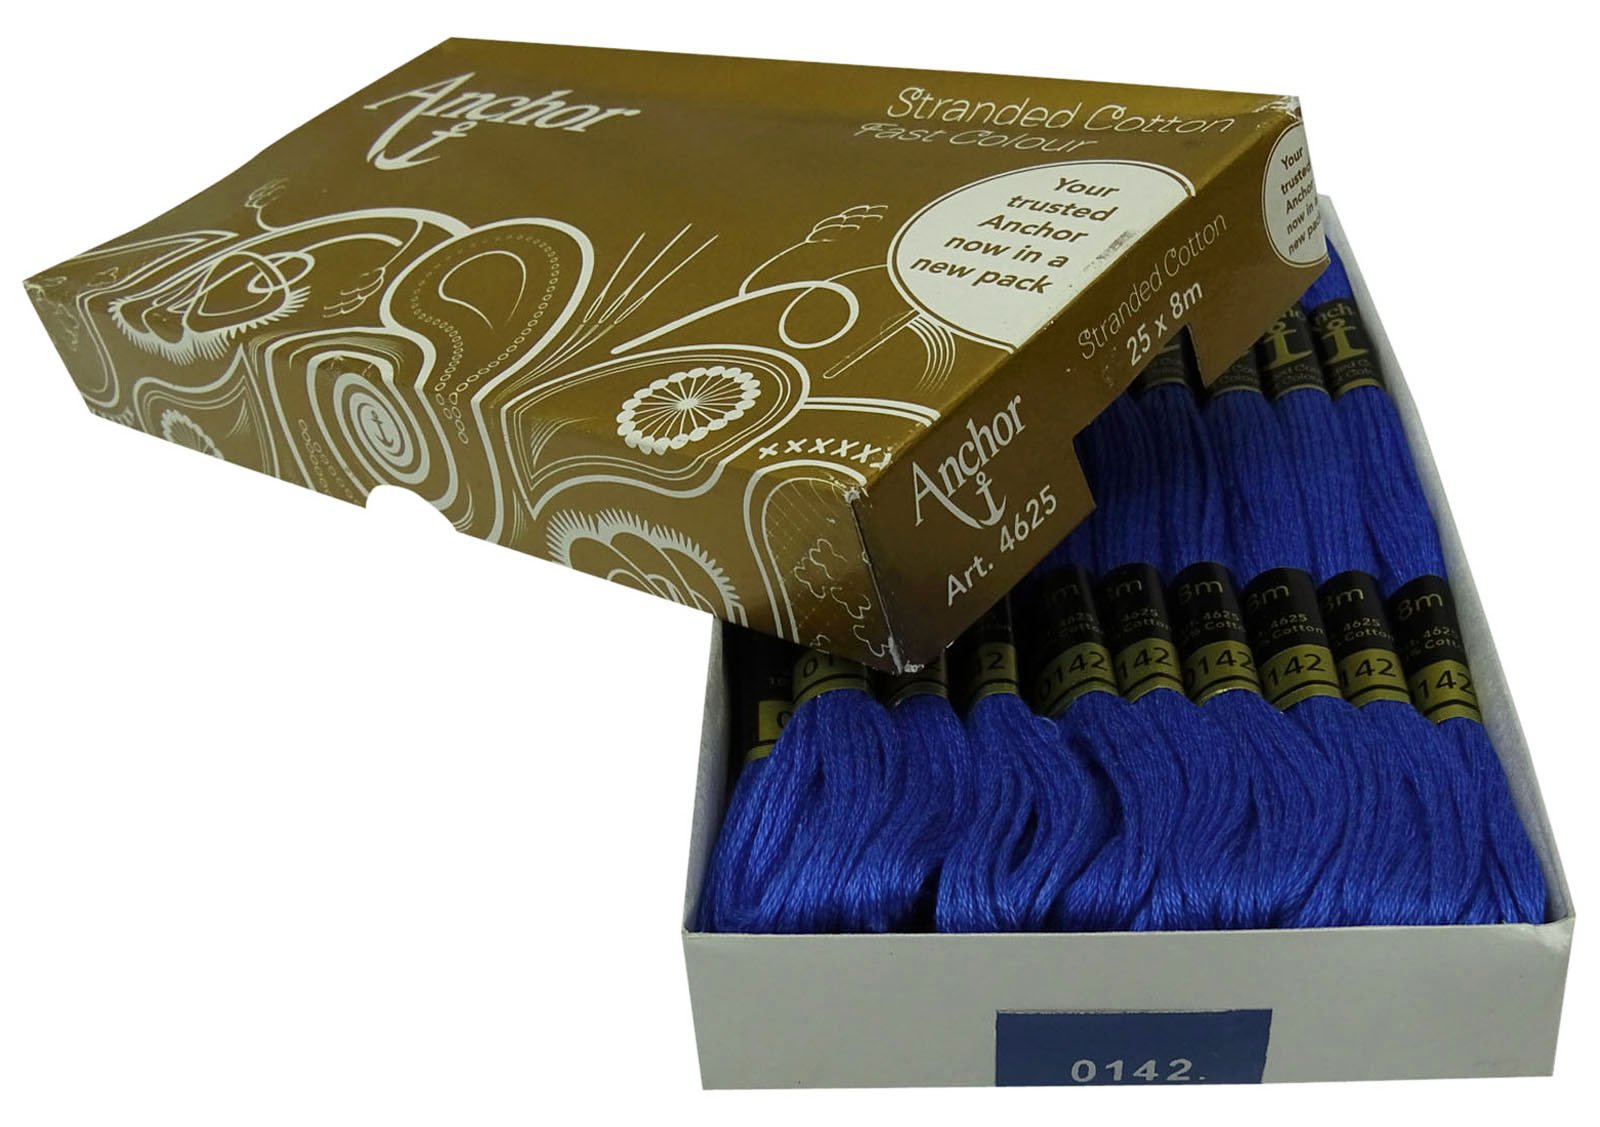 IBA Indianbeautifulart Cross Stitch Hand Embroidery Thread Stranded Cotton Craft Sewing Floss 25 Skeins-Royal Blue